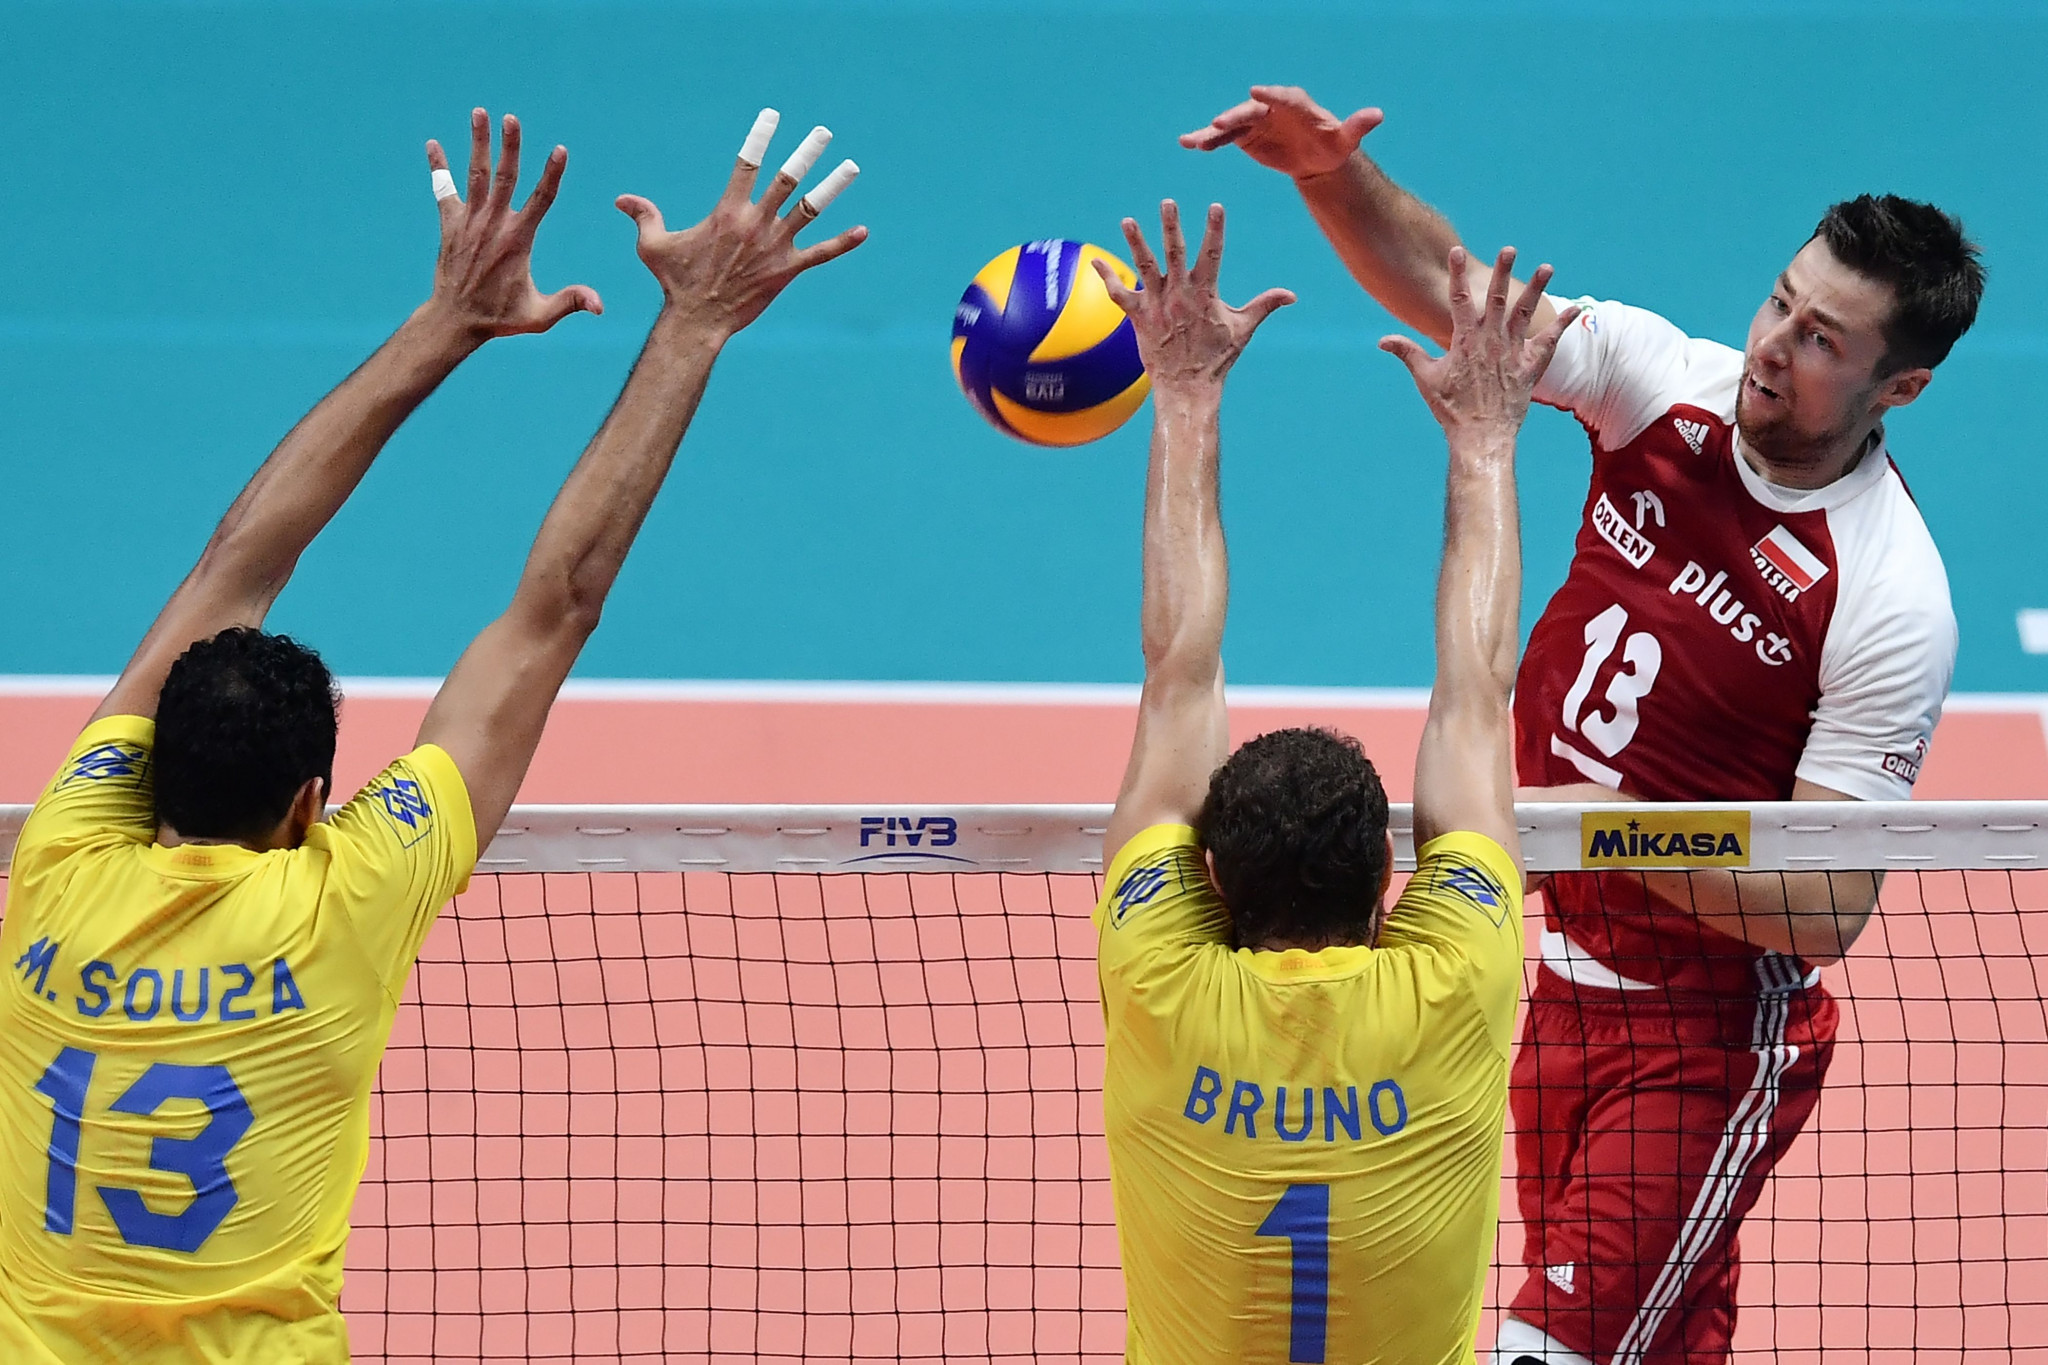 FIVB calls for Poland's Kubiak to apologise after being suspended for anti-Iranian remarks